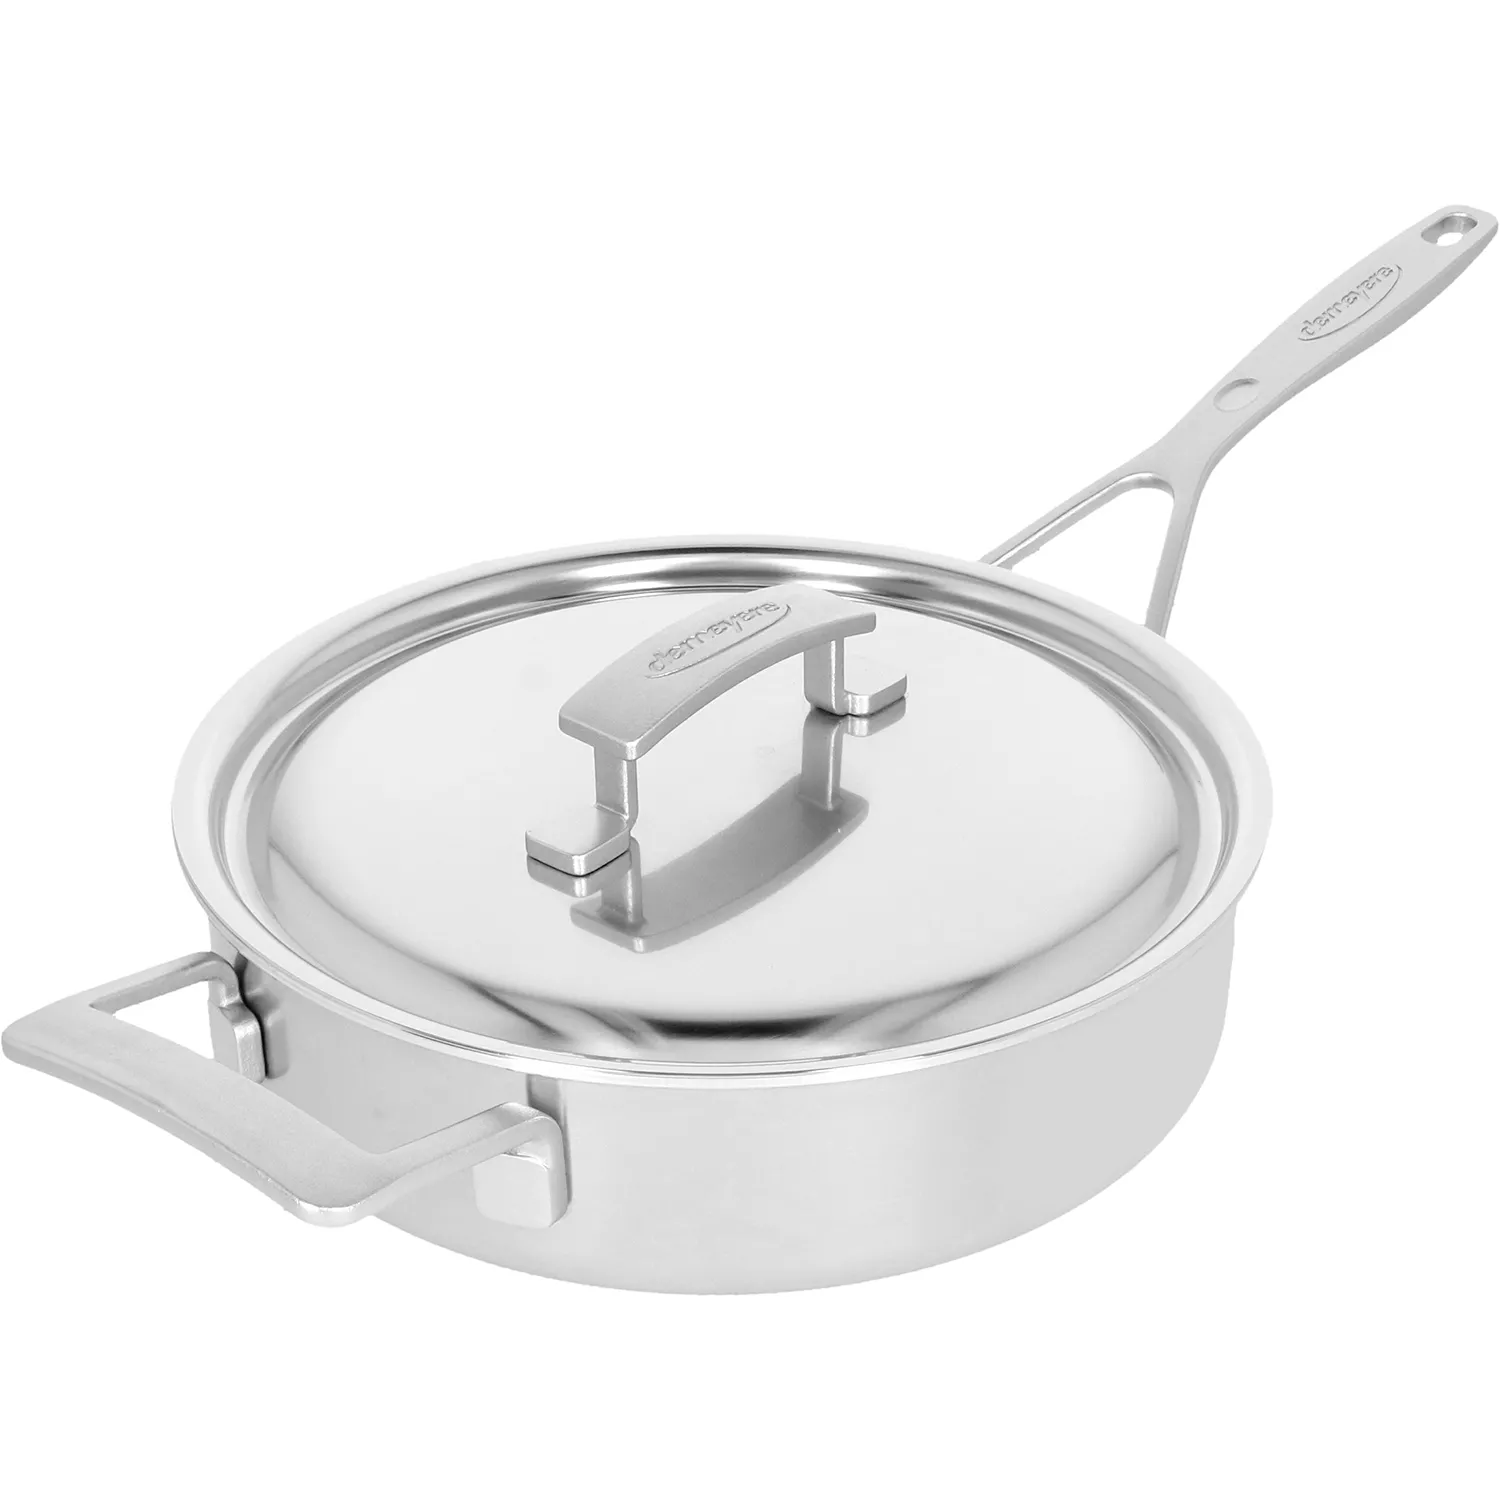 Photos - Pan Demeyere Industry5 Stainless Steel Saut  With Helper Handle & Lid 48424 